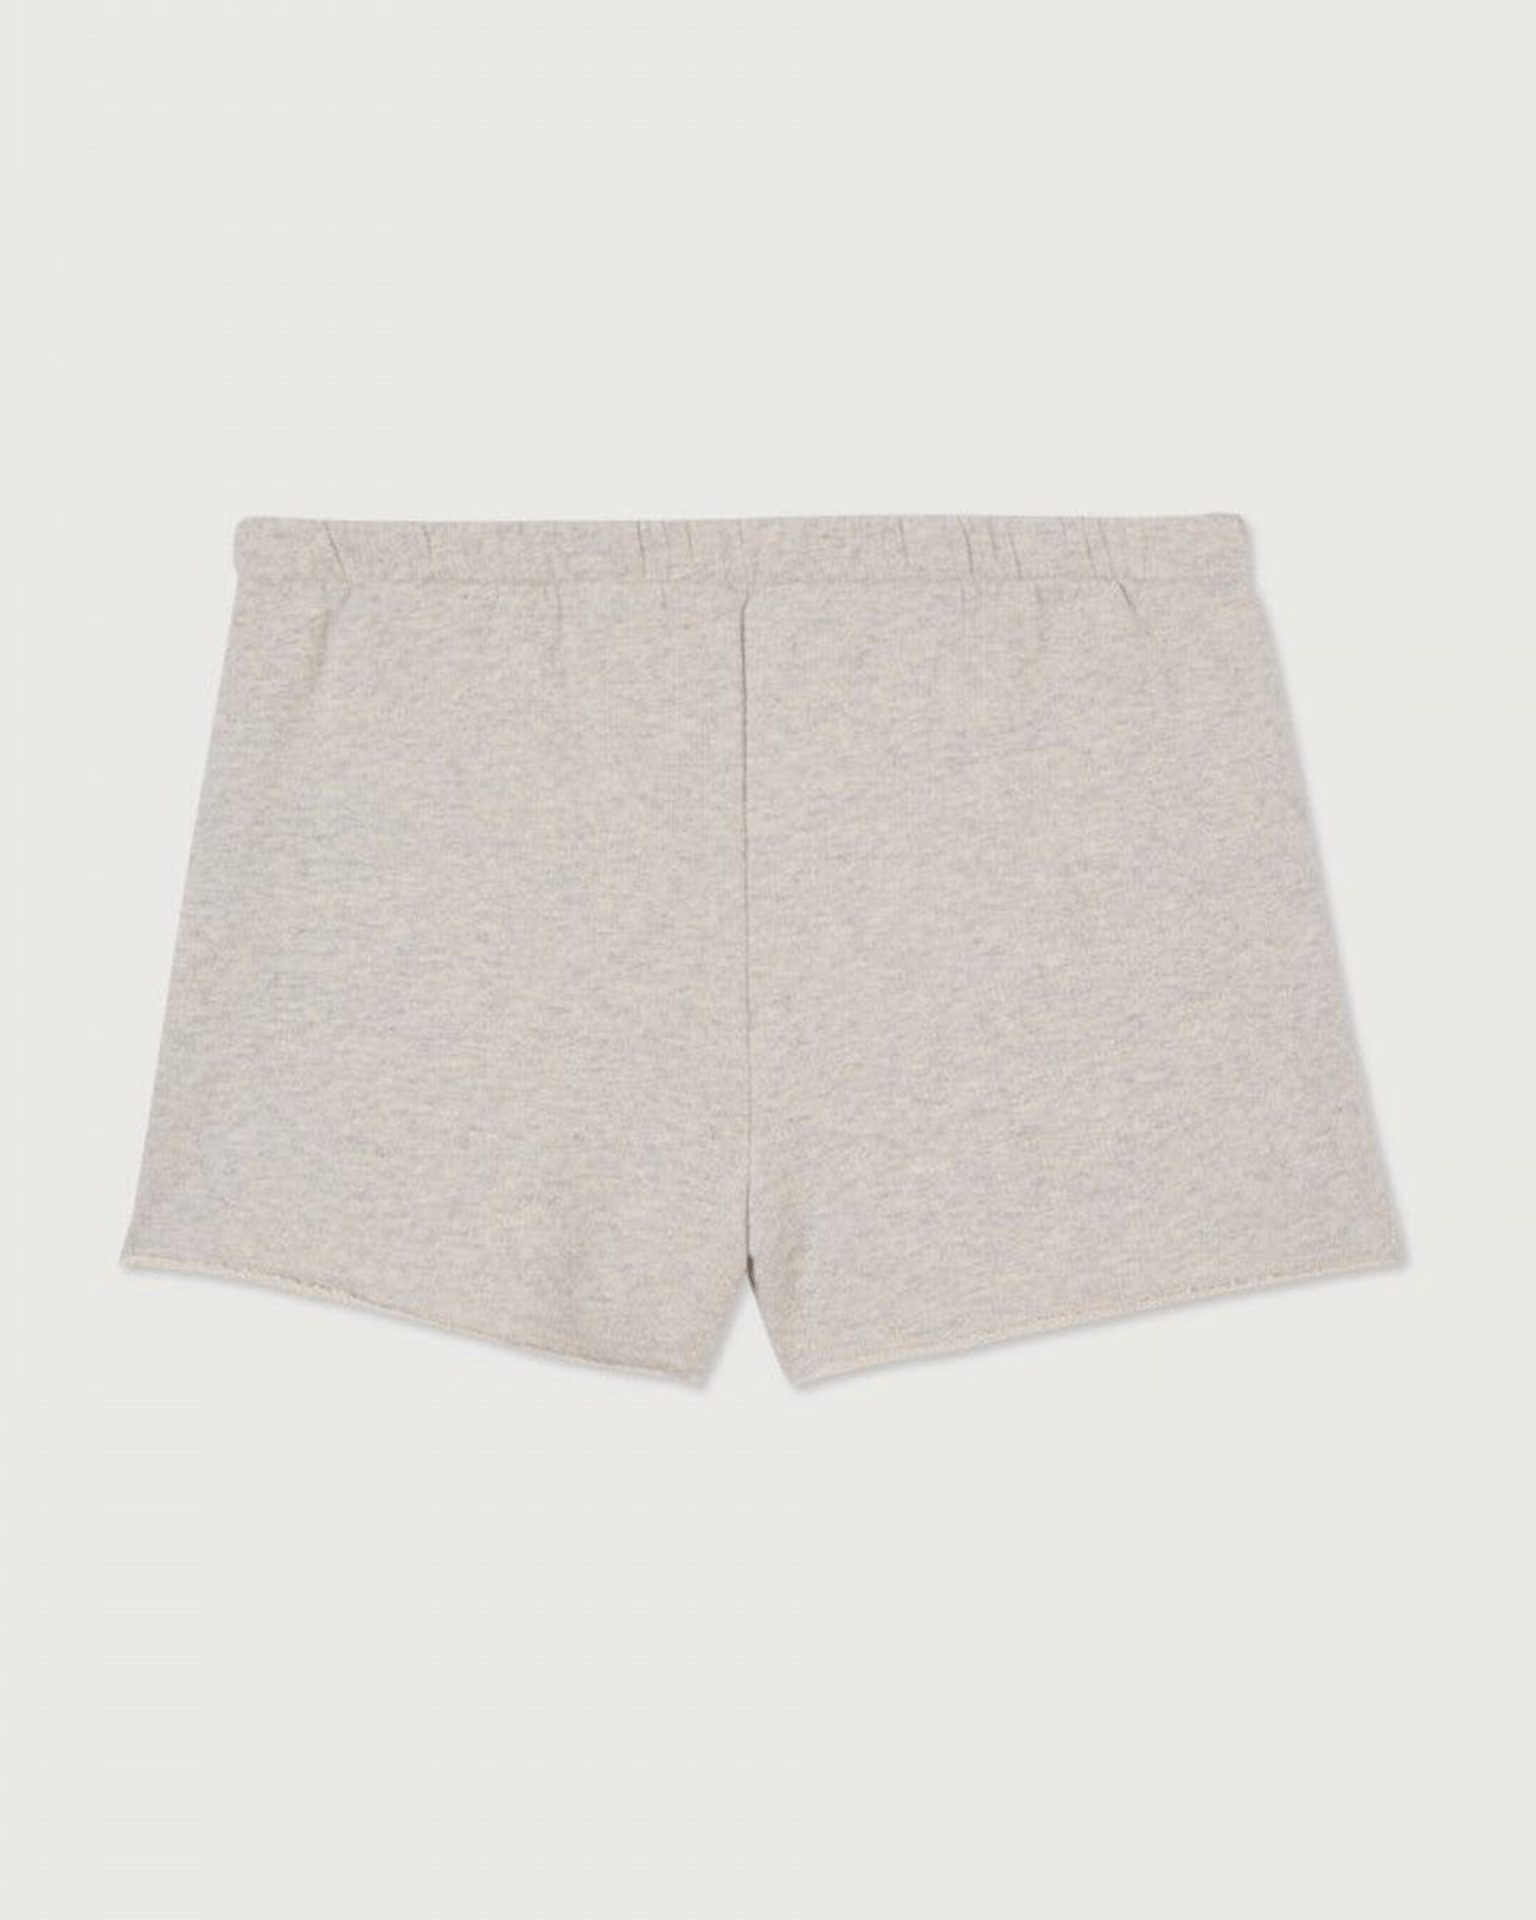 American Vintage Sweatshorts in Gris Boutiques - Bliss Clair